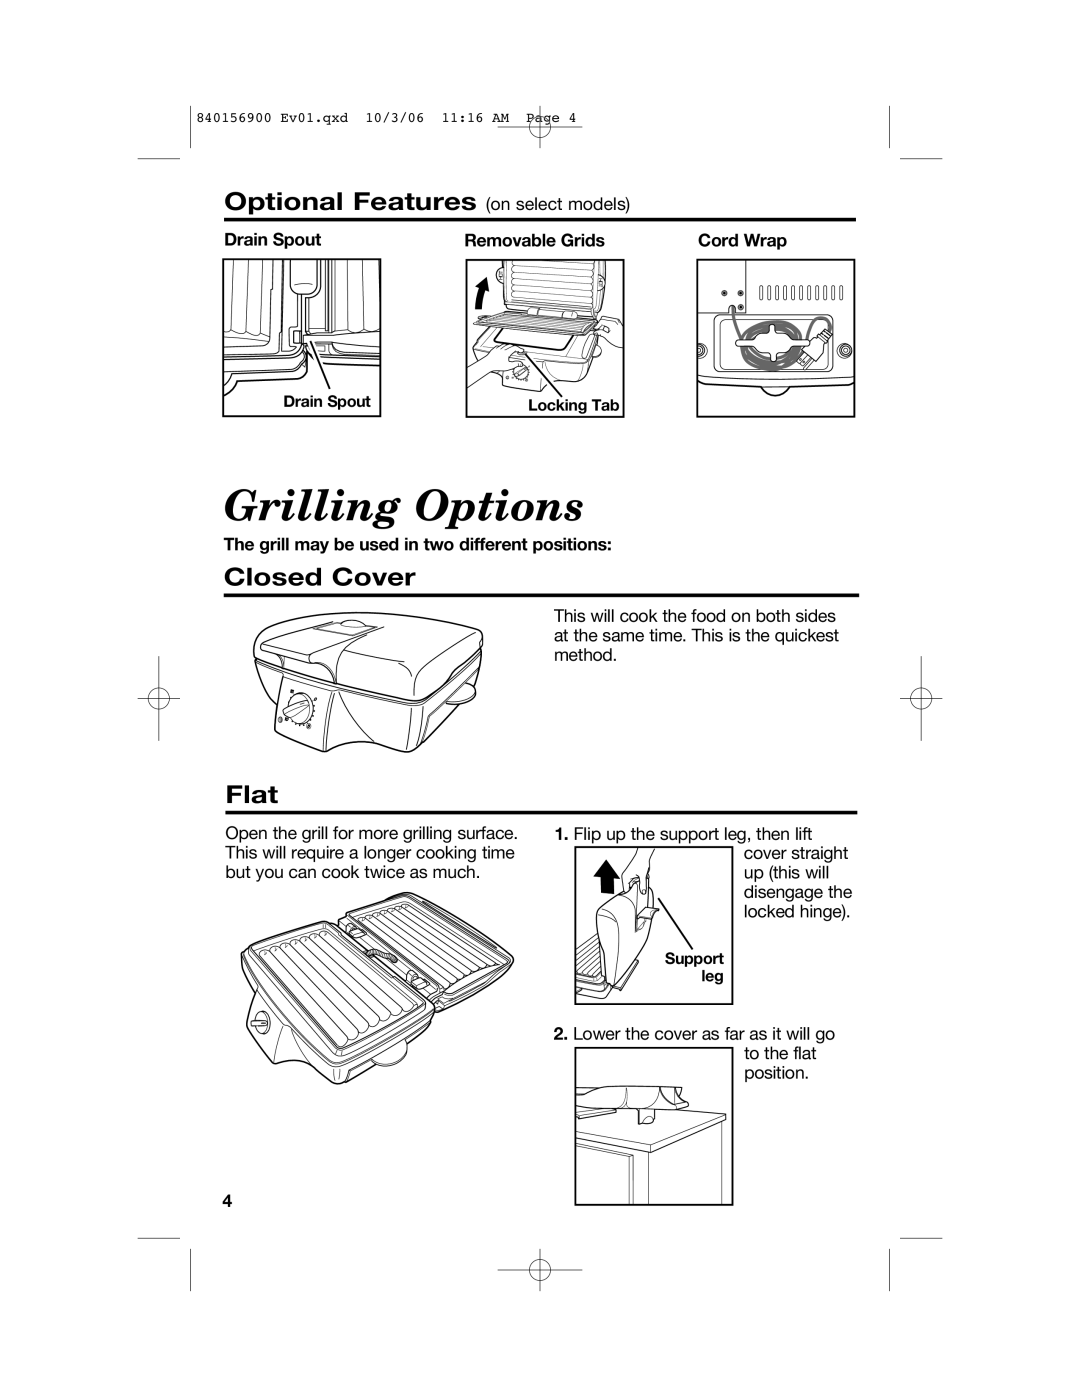 Hamilton Beach 25285 Grilling Options, Optional Features on select models, Closed Cover, Flat, Drain Spout, Cord Wrap 